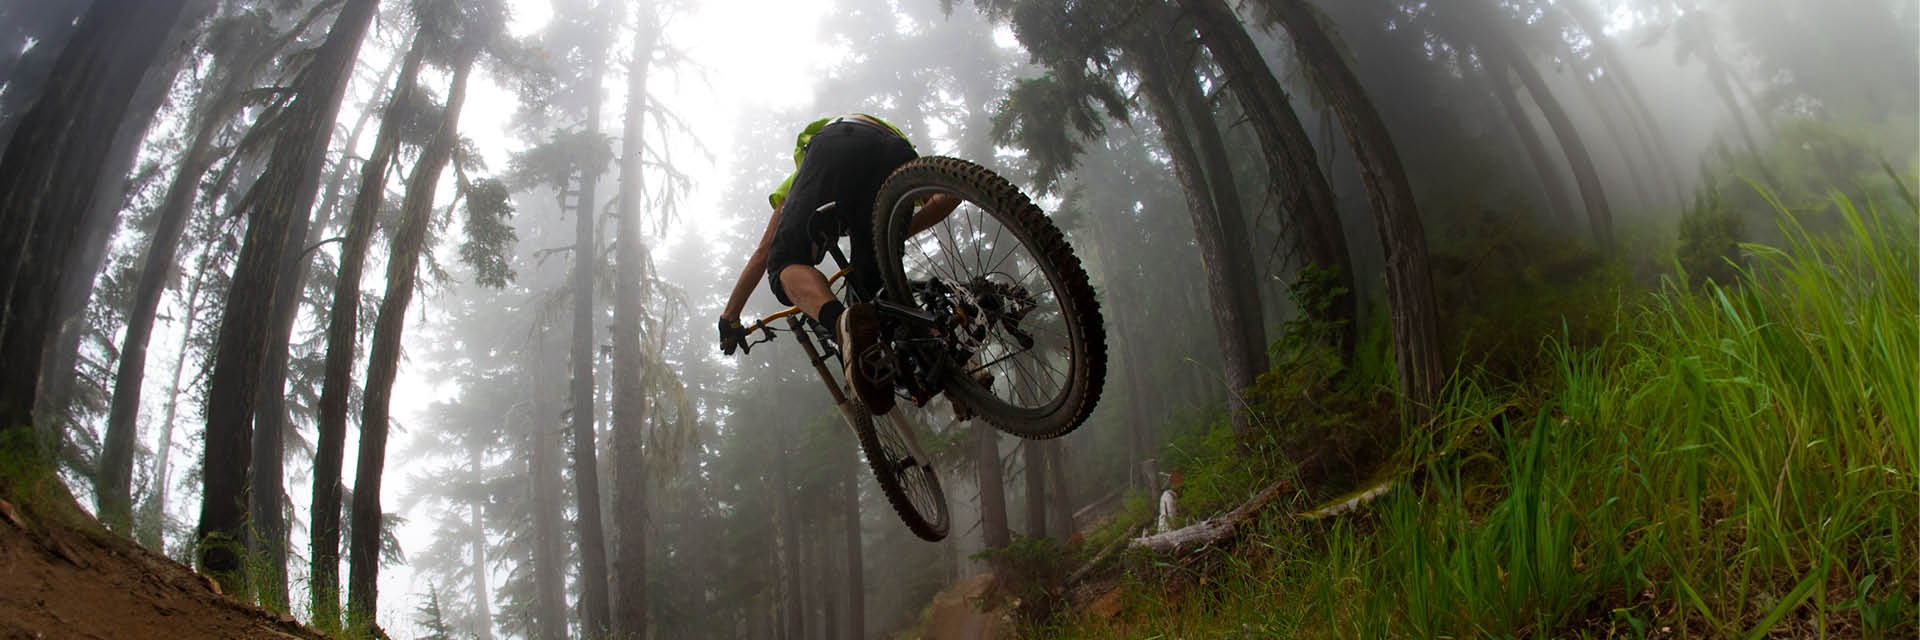 Mountain bike mid-air on downhill forest track